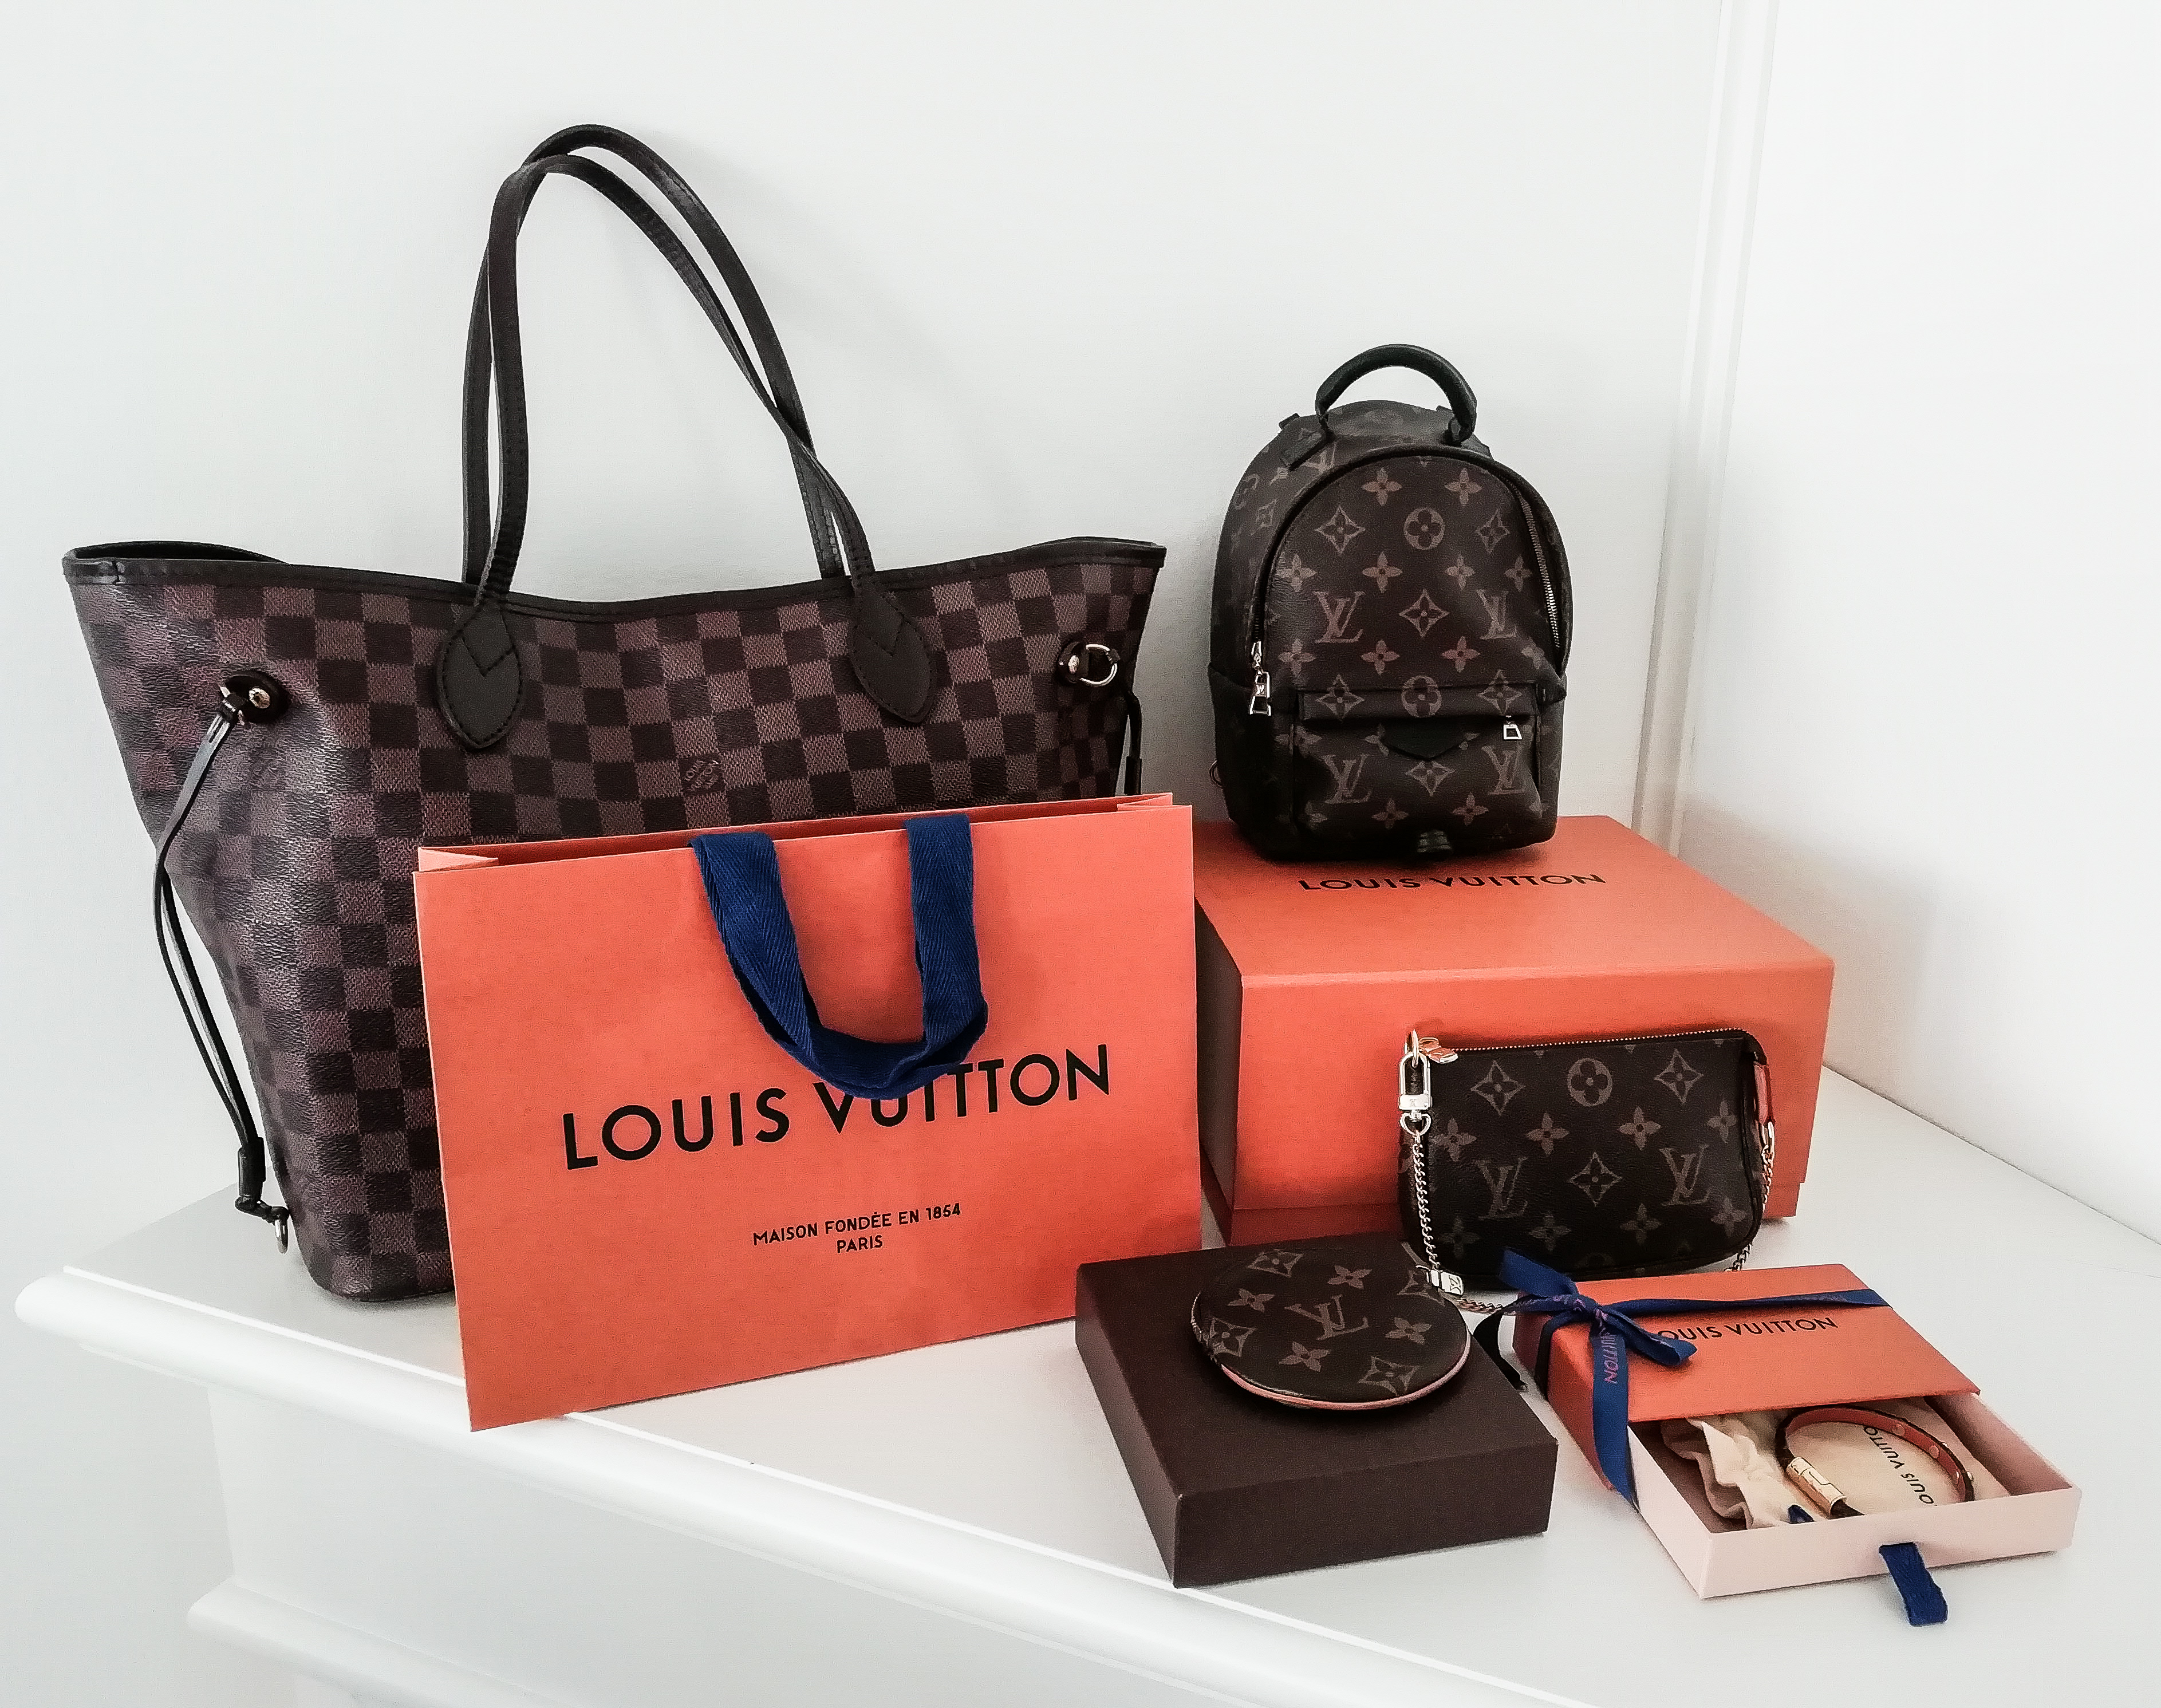 LOUIS VUITTON IS DISCONTINUING MORE CANVAS! Say